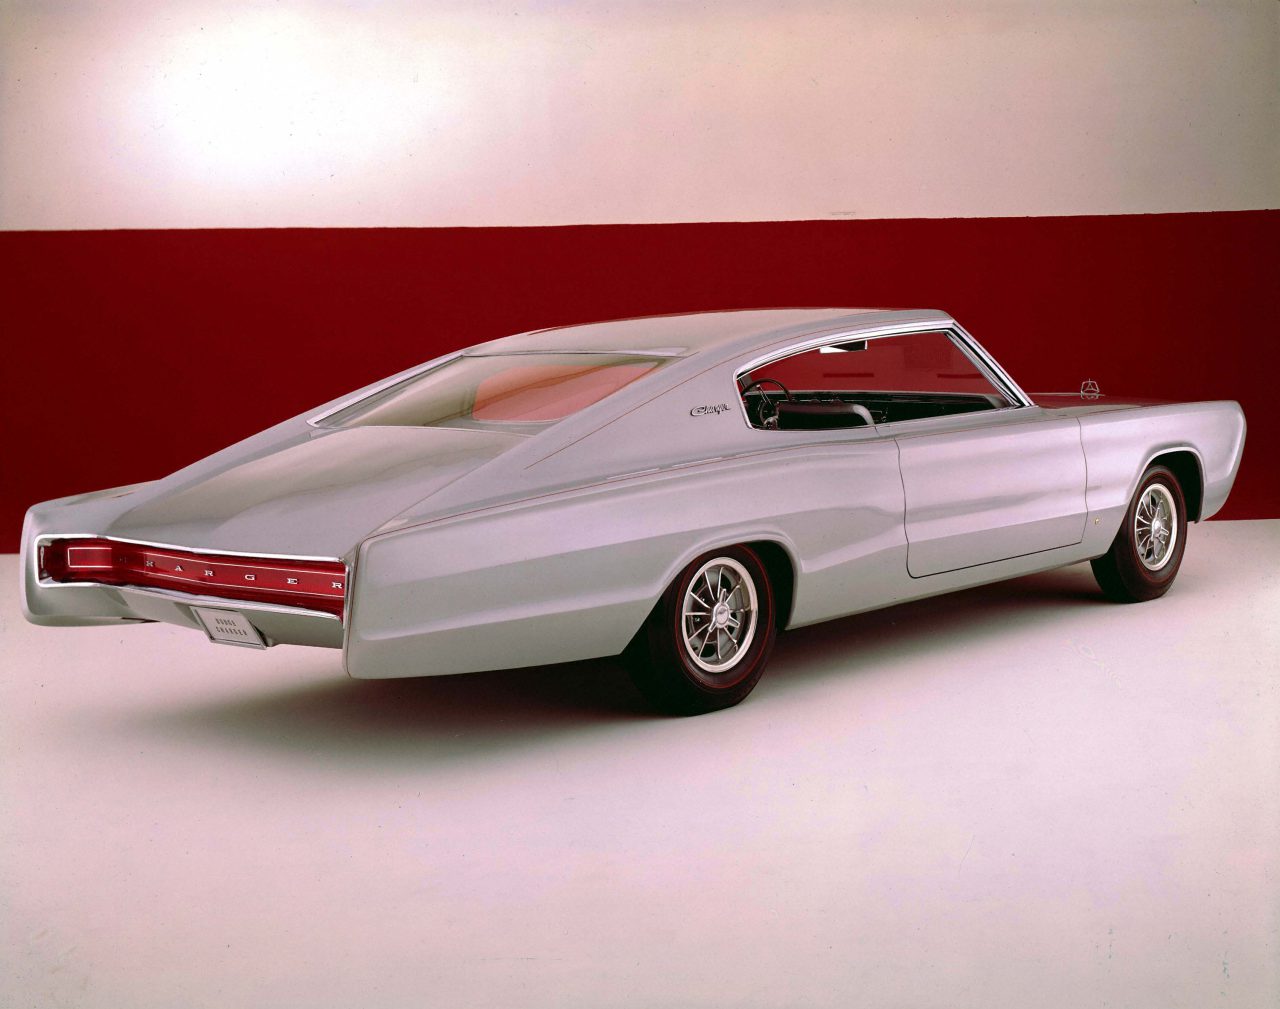  1965 Dodge Charger II concept car